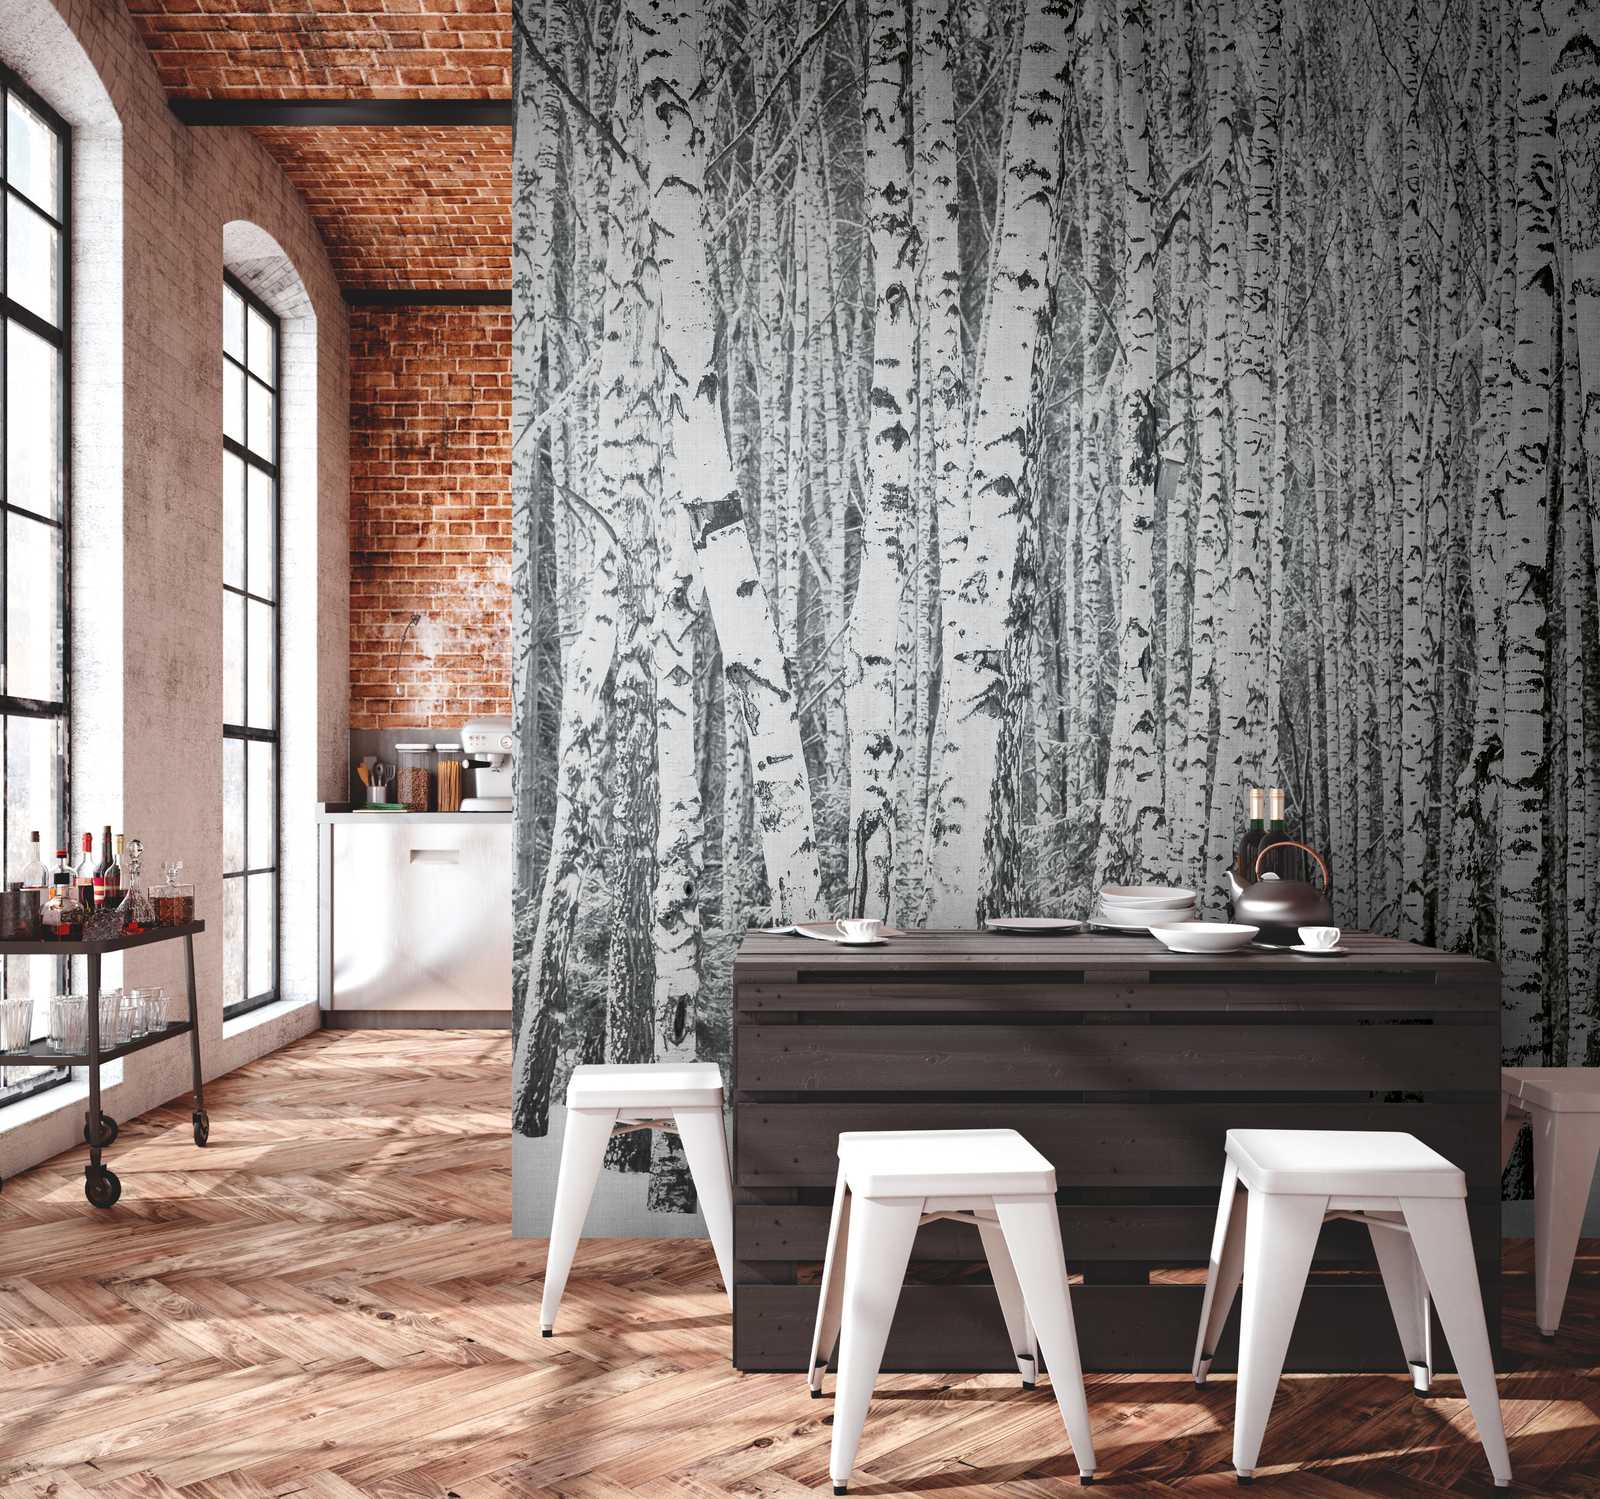             Wallpaper novelty | motif wallpaper birch forest in the snow, black and white
        